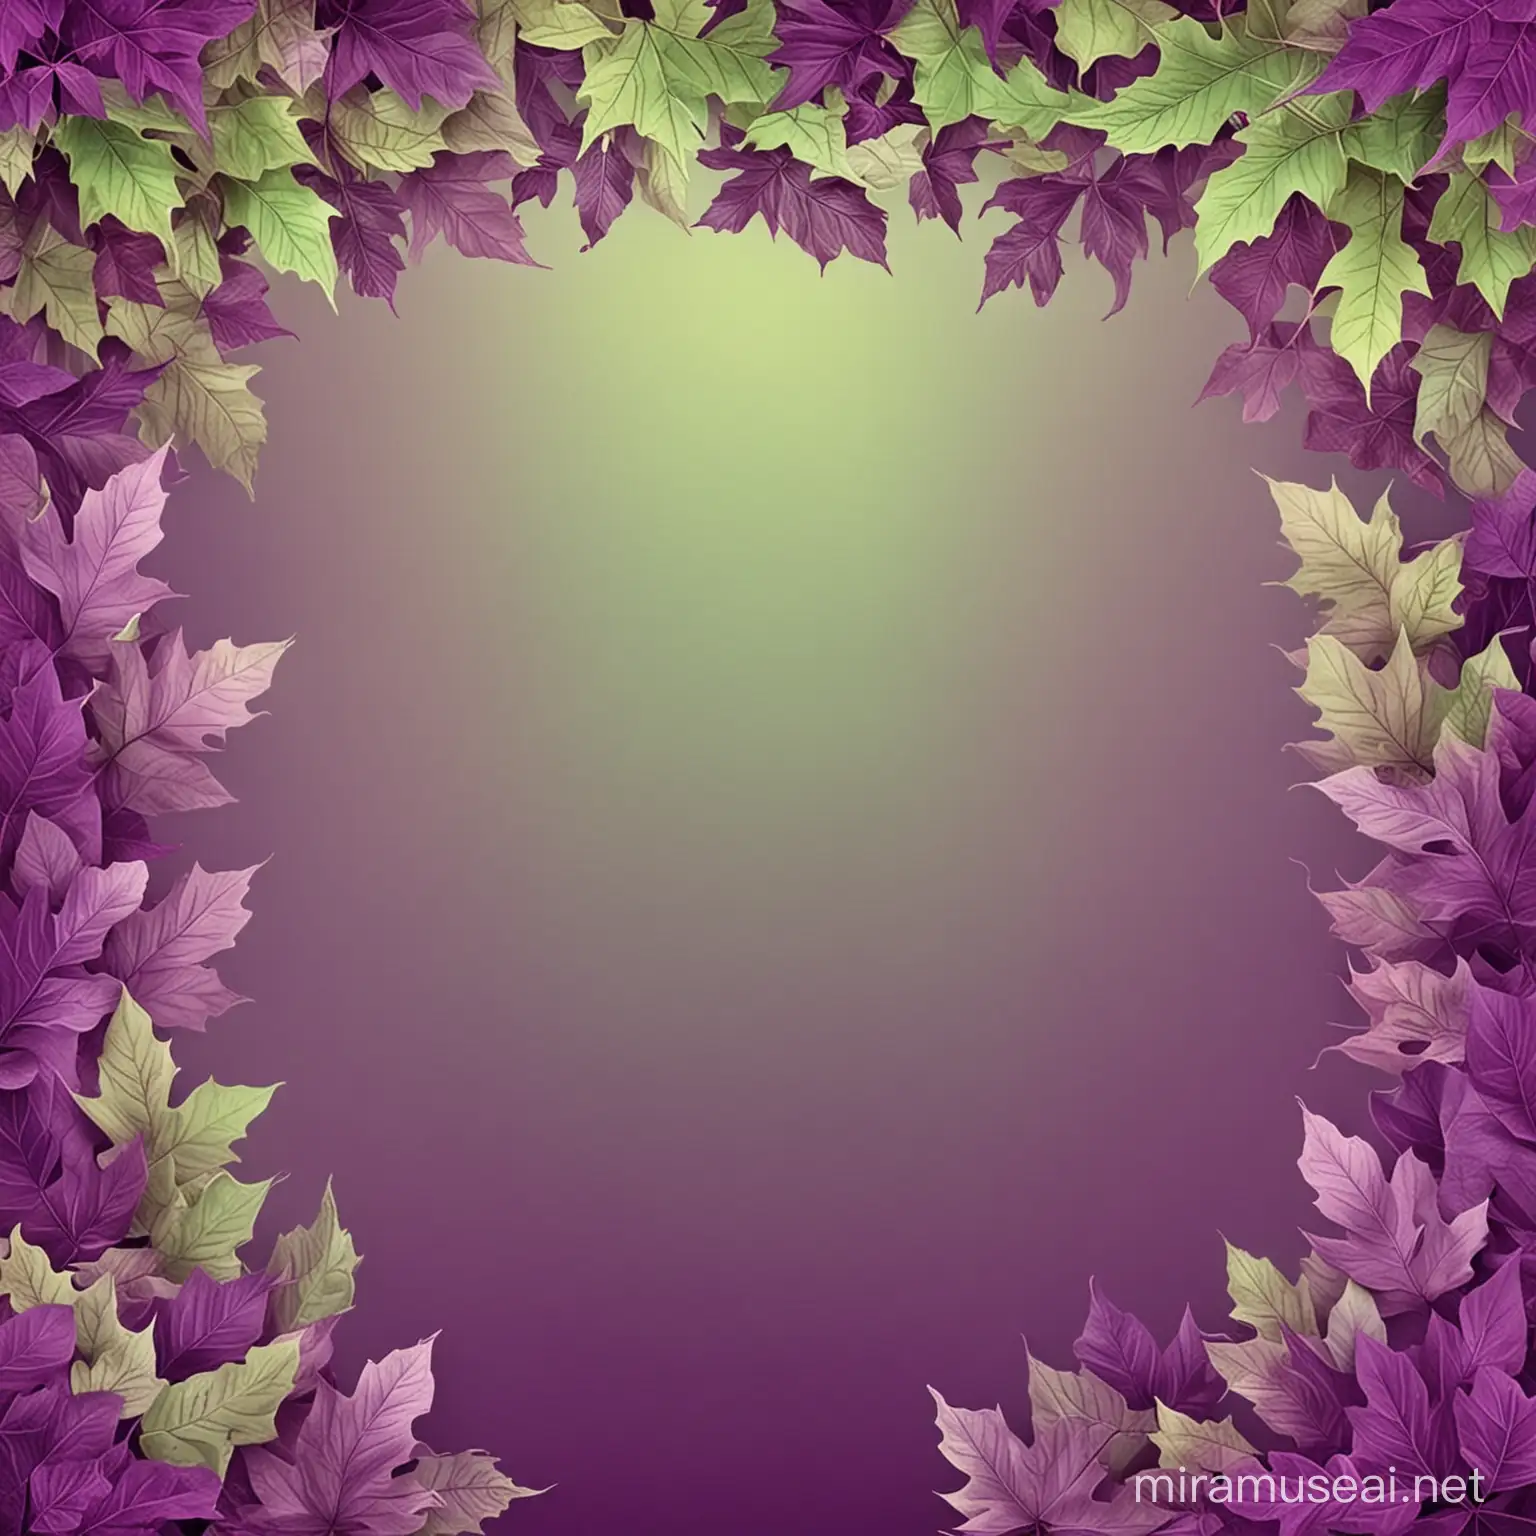 Autumn Scene with Purple and Green Leaves